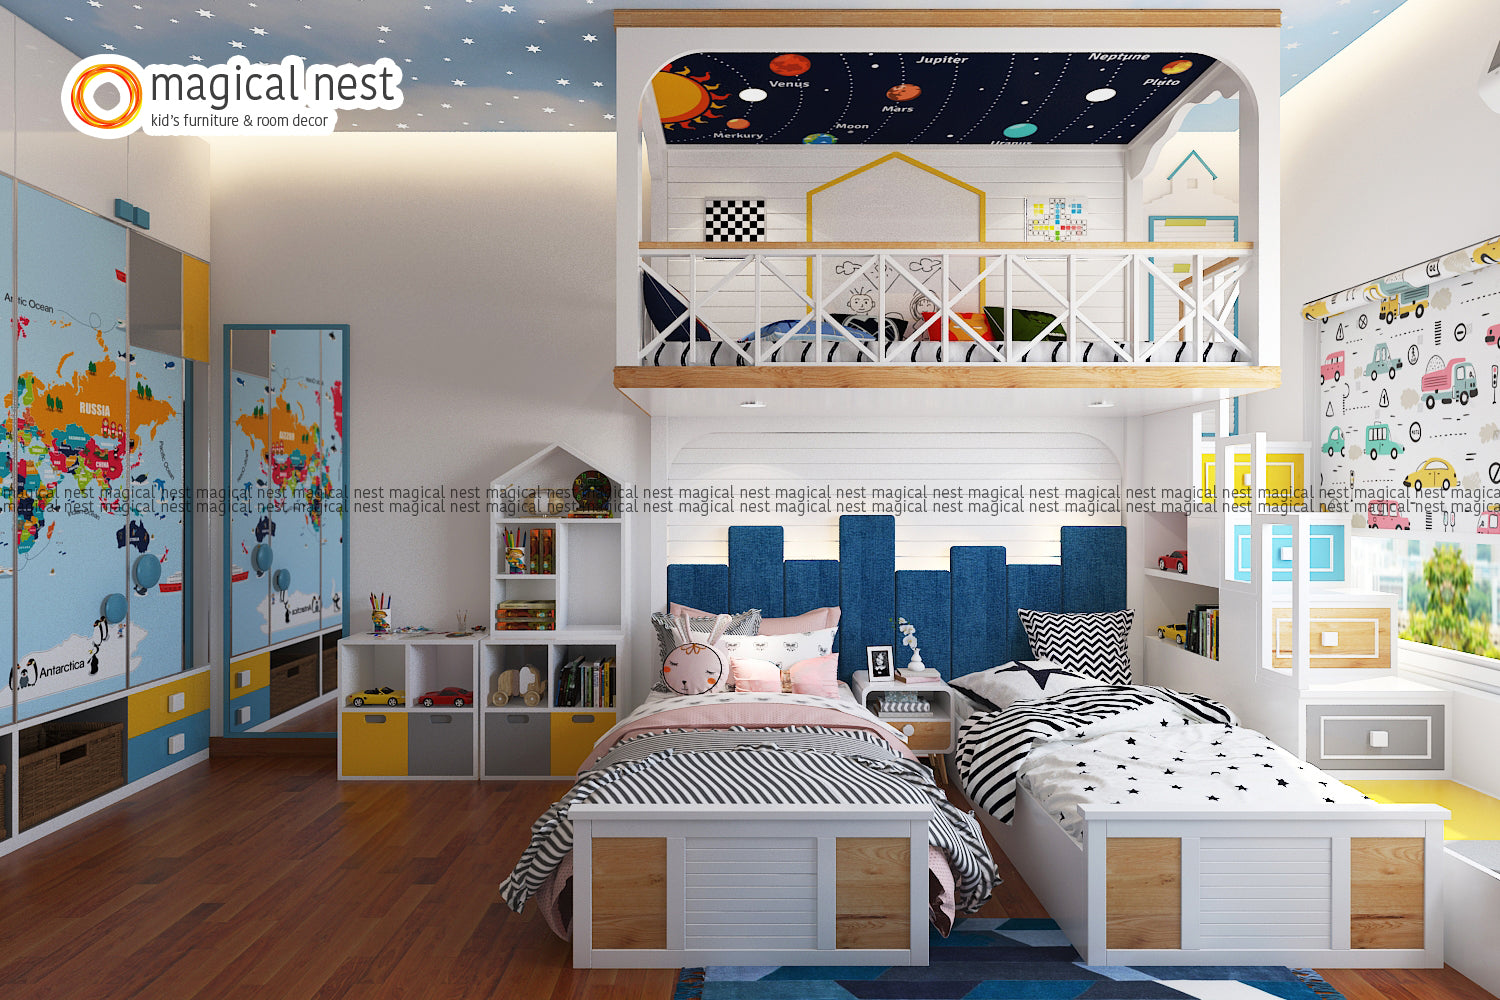 A kid’s room for the siblings. Independent bed, loft area for play that has board games and scribbling area, and a study table. Wardrobe and cabins for storage.